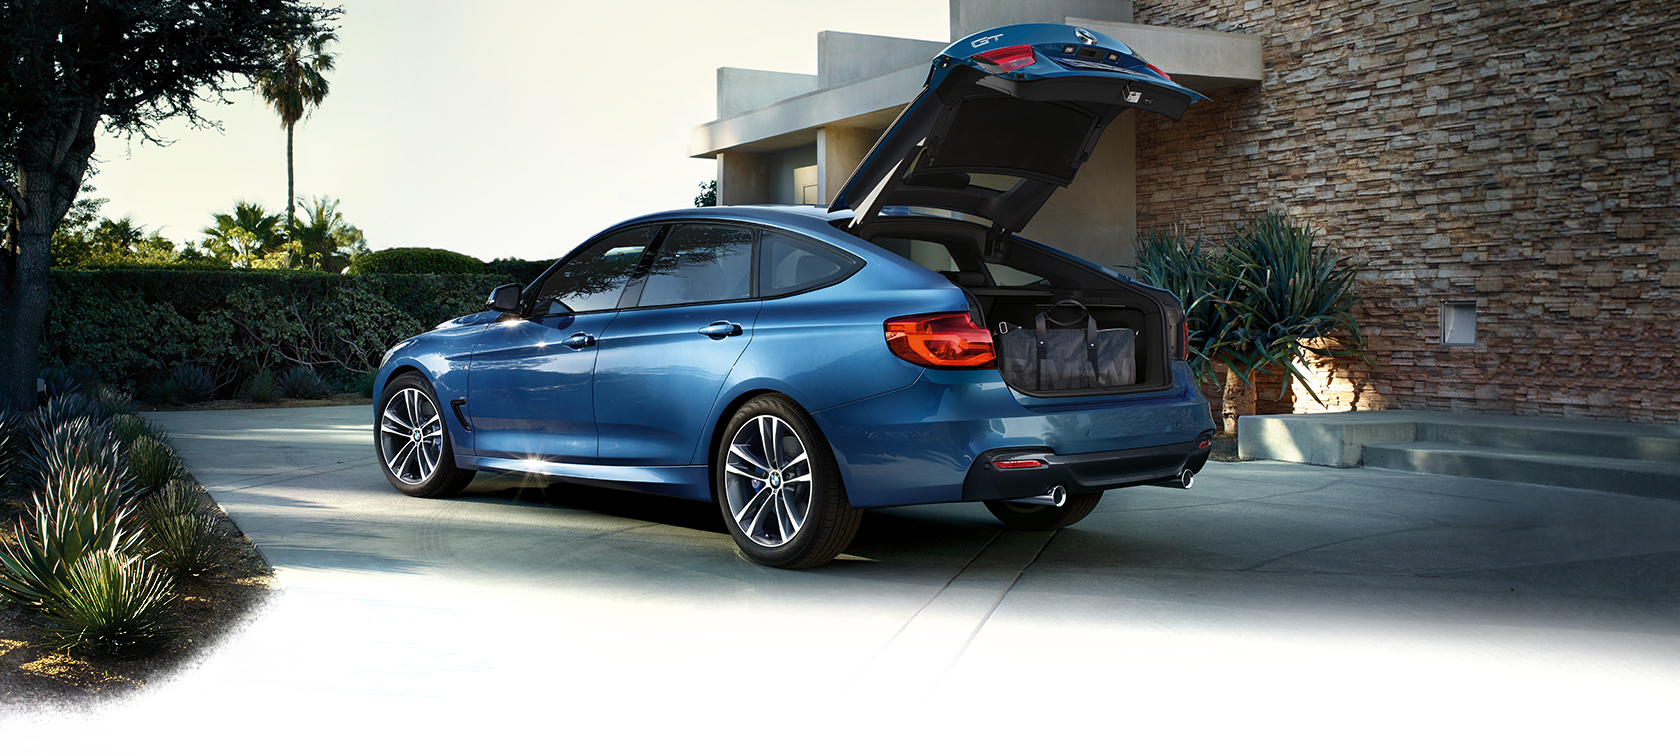 The BMW 3 Series Gran Turismo : Comfort & functionality